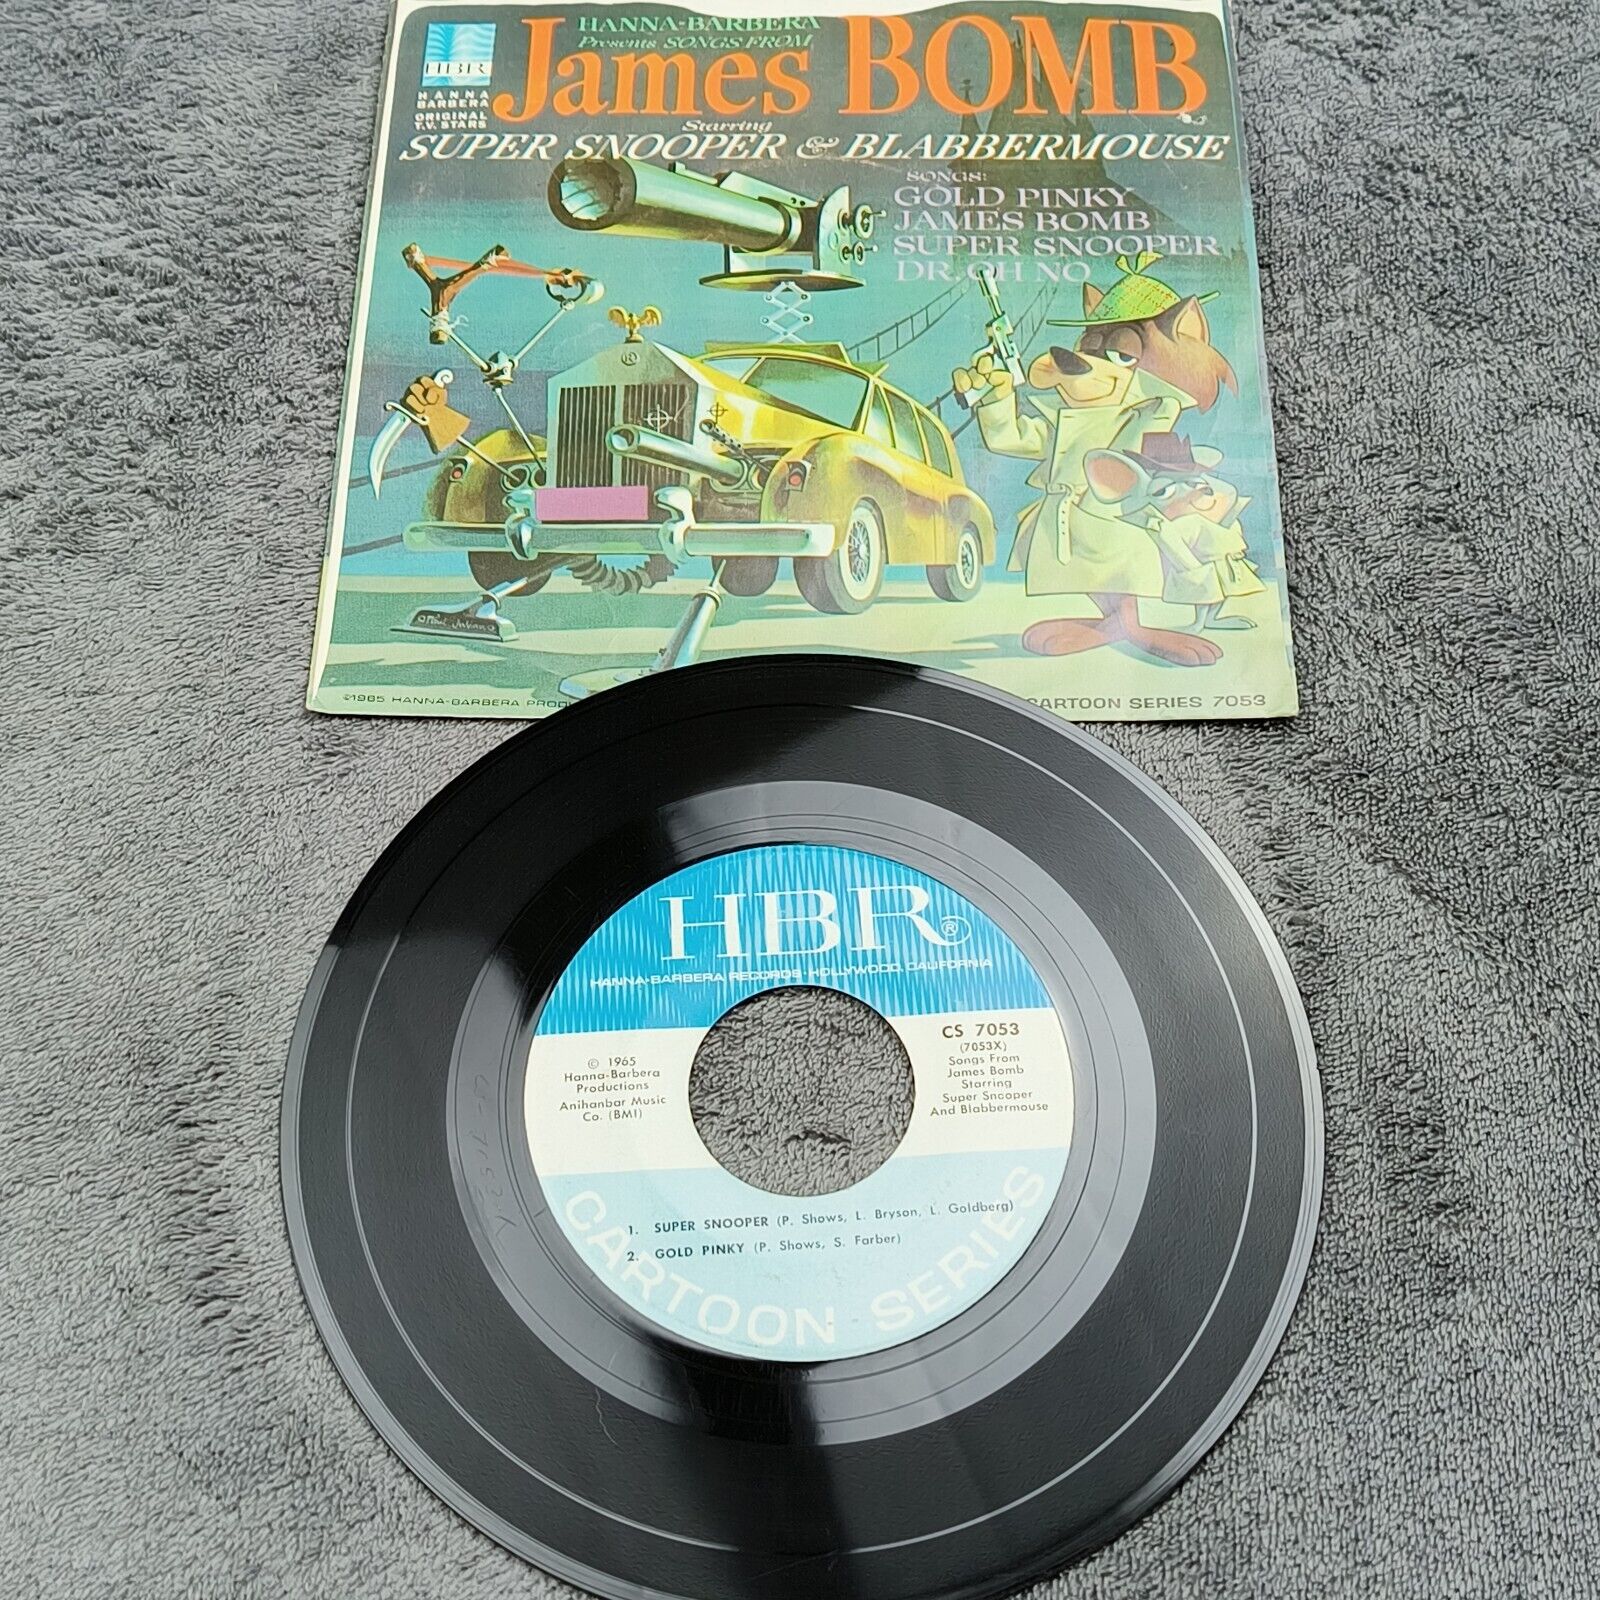 Super Snooper & Blabbermouse Songs From James Bomb 45 RPM Record With Sleeve 